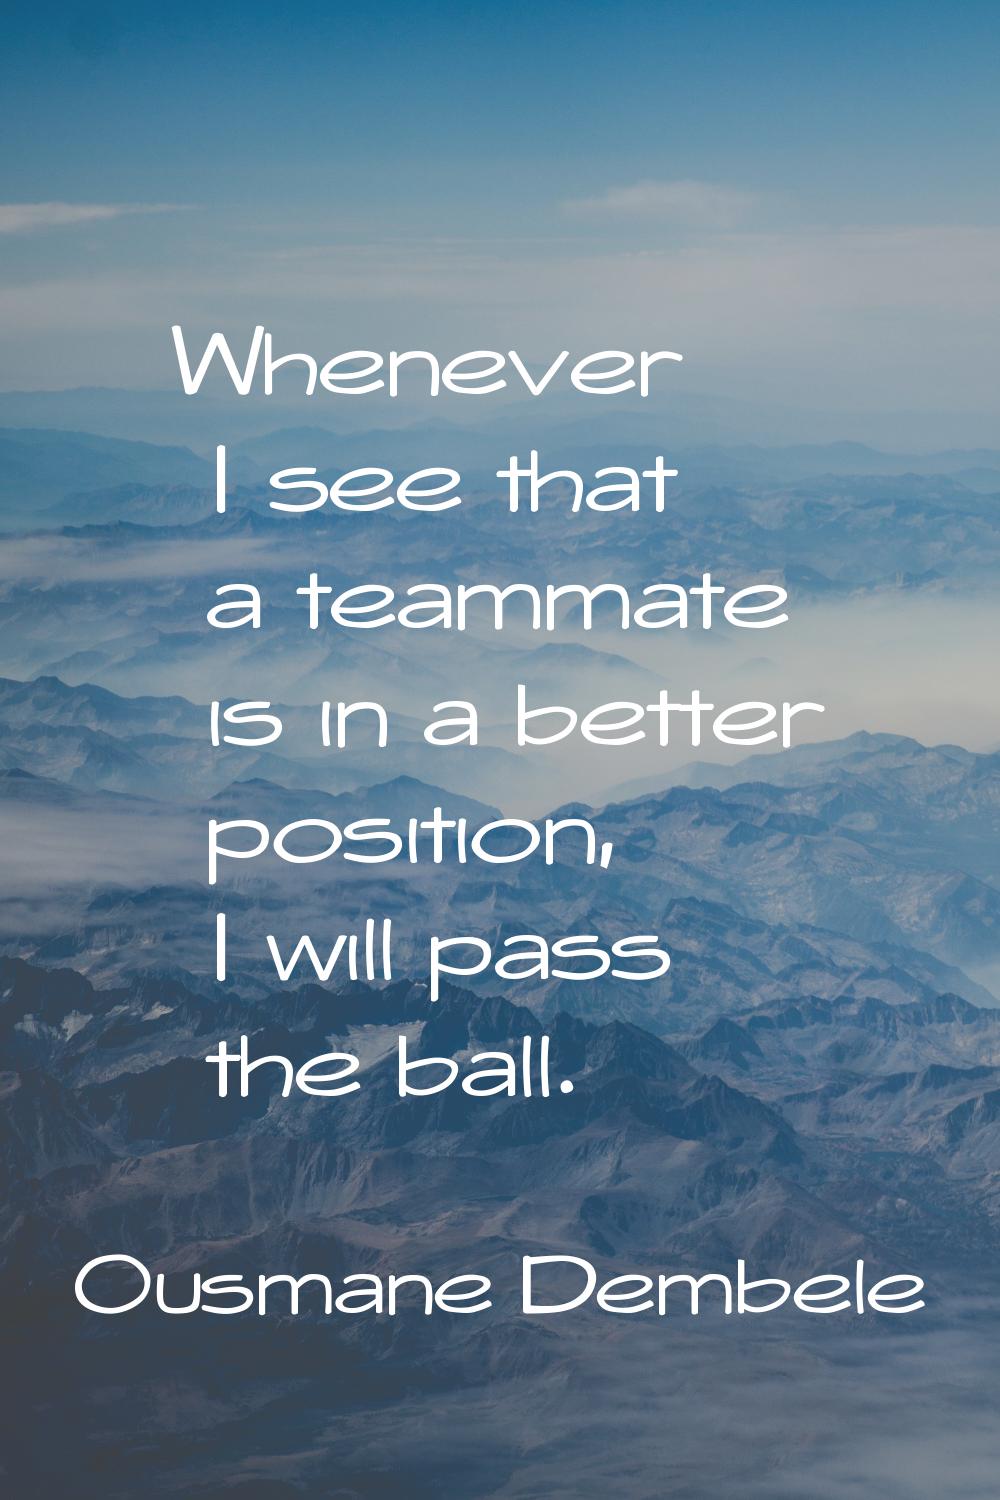 Whenever I see that a teammate is in a better position, I will pass the ball.